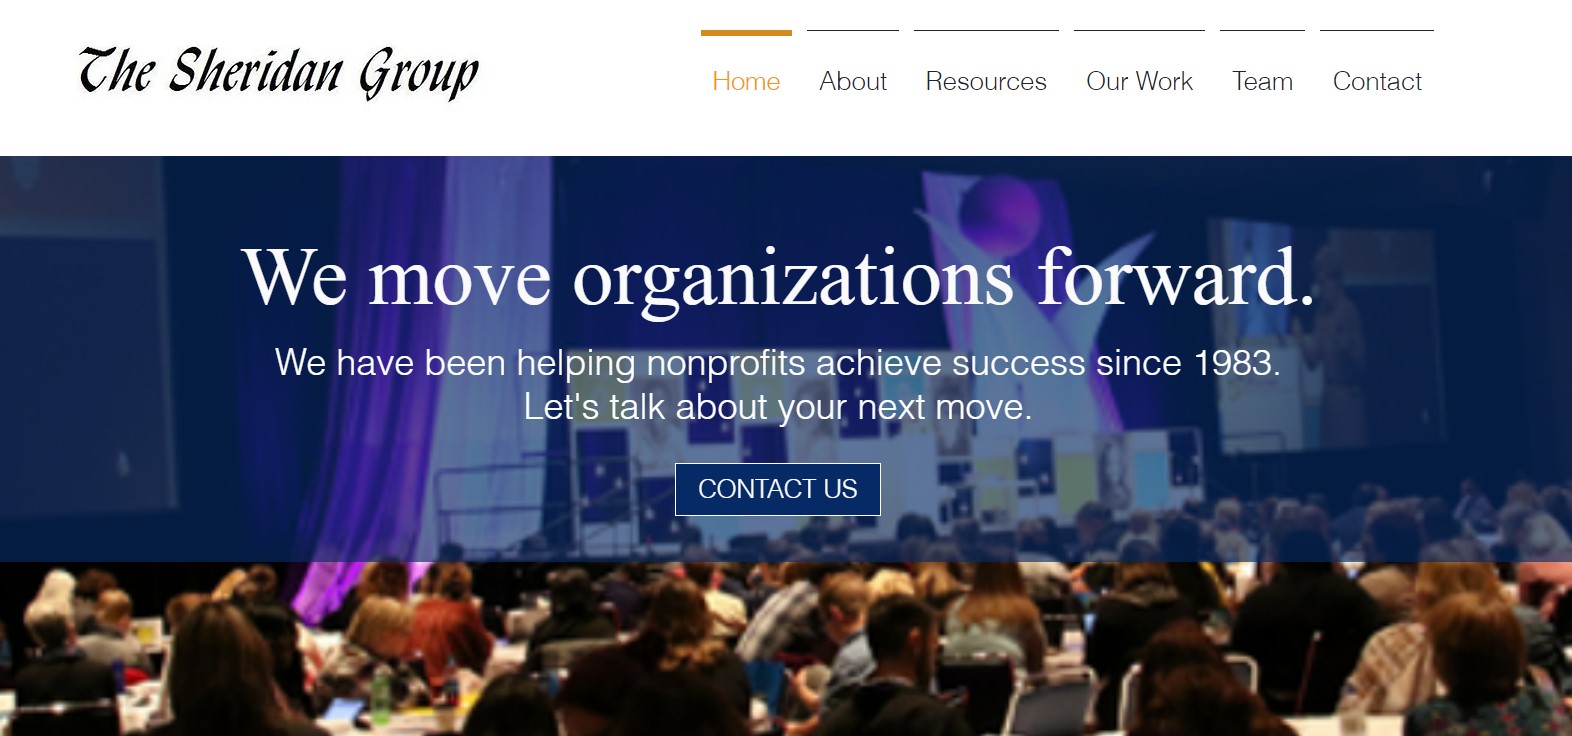 Grow your organization's mission by partnering with experienced fundraising consultants.